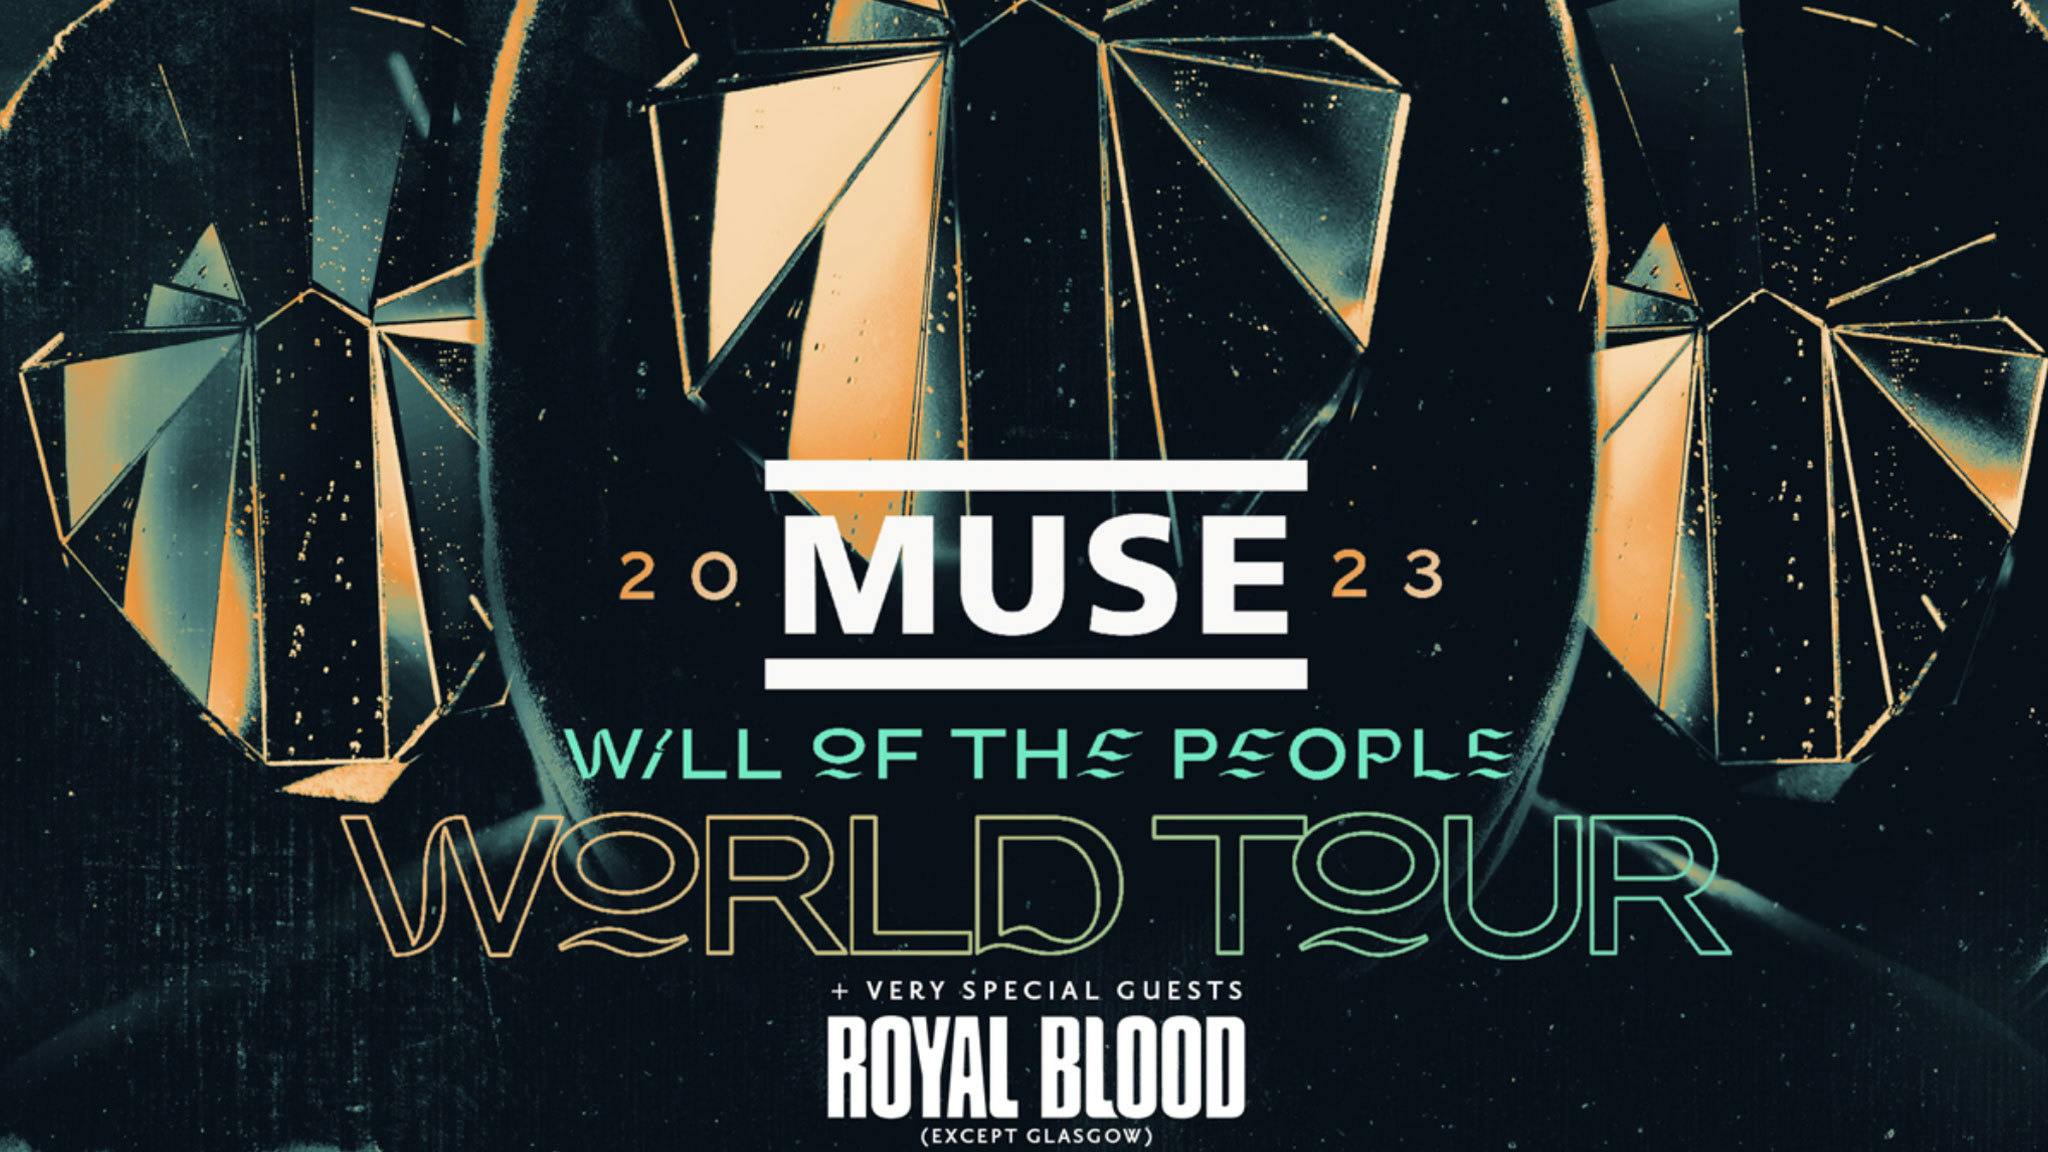 Muse announce massive UK shows with Royal Blood